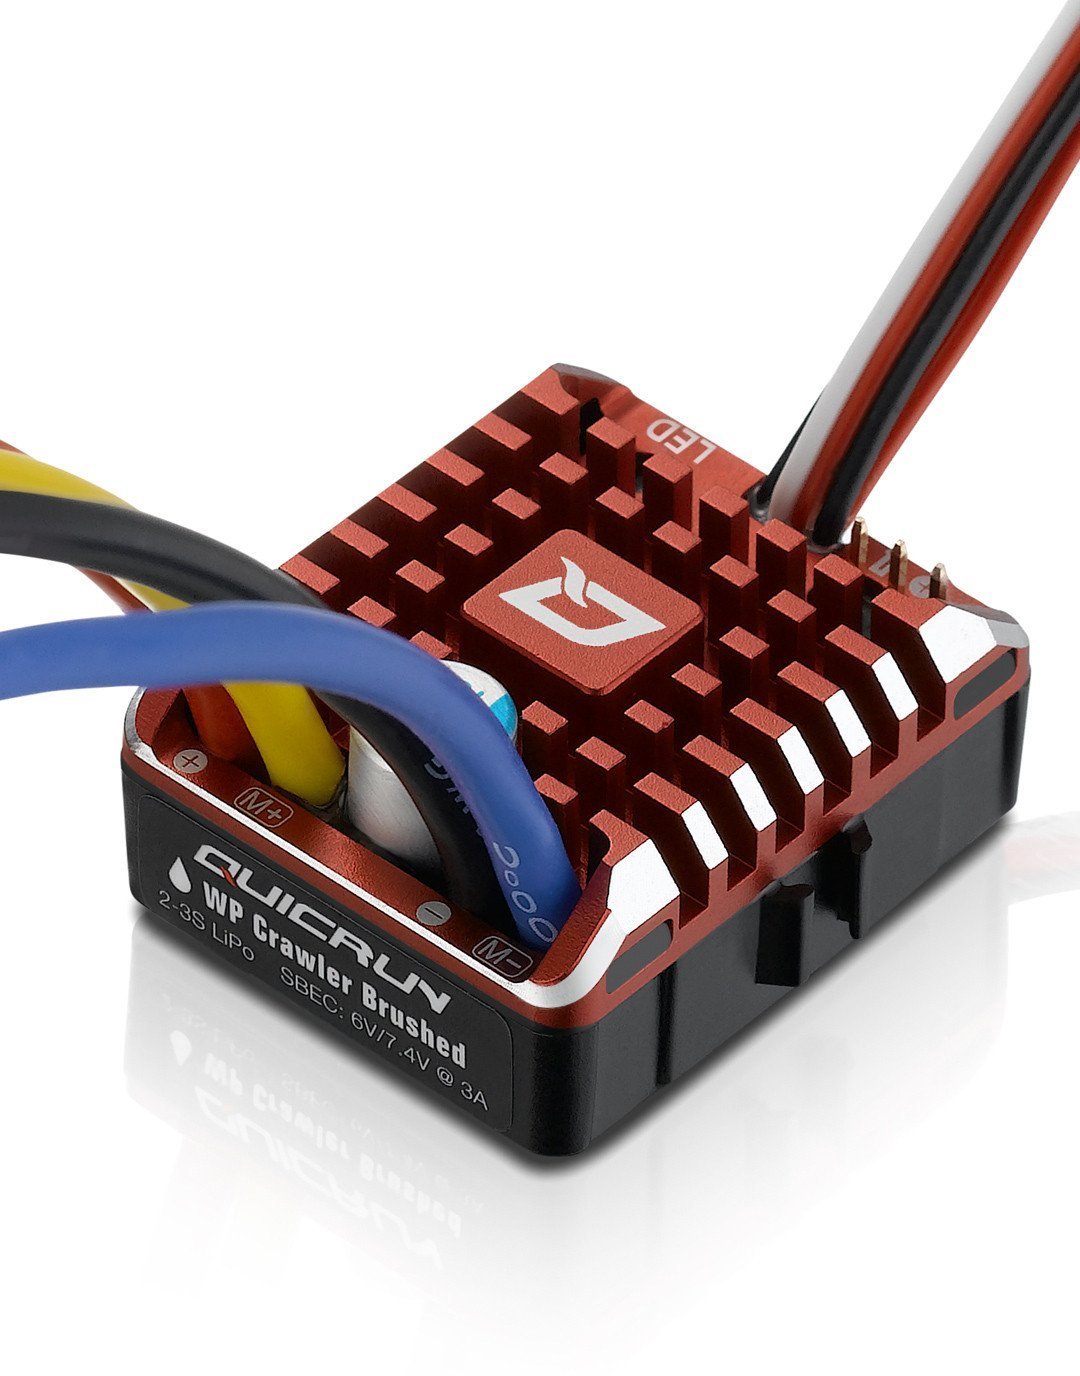 Hobbywing QUICRUN Electronic Speed Controller 1080 g2 brushed ESC (2-3S) (80A) - HW/30120202/ hw1080 g2